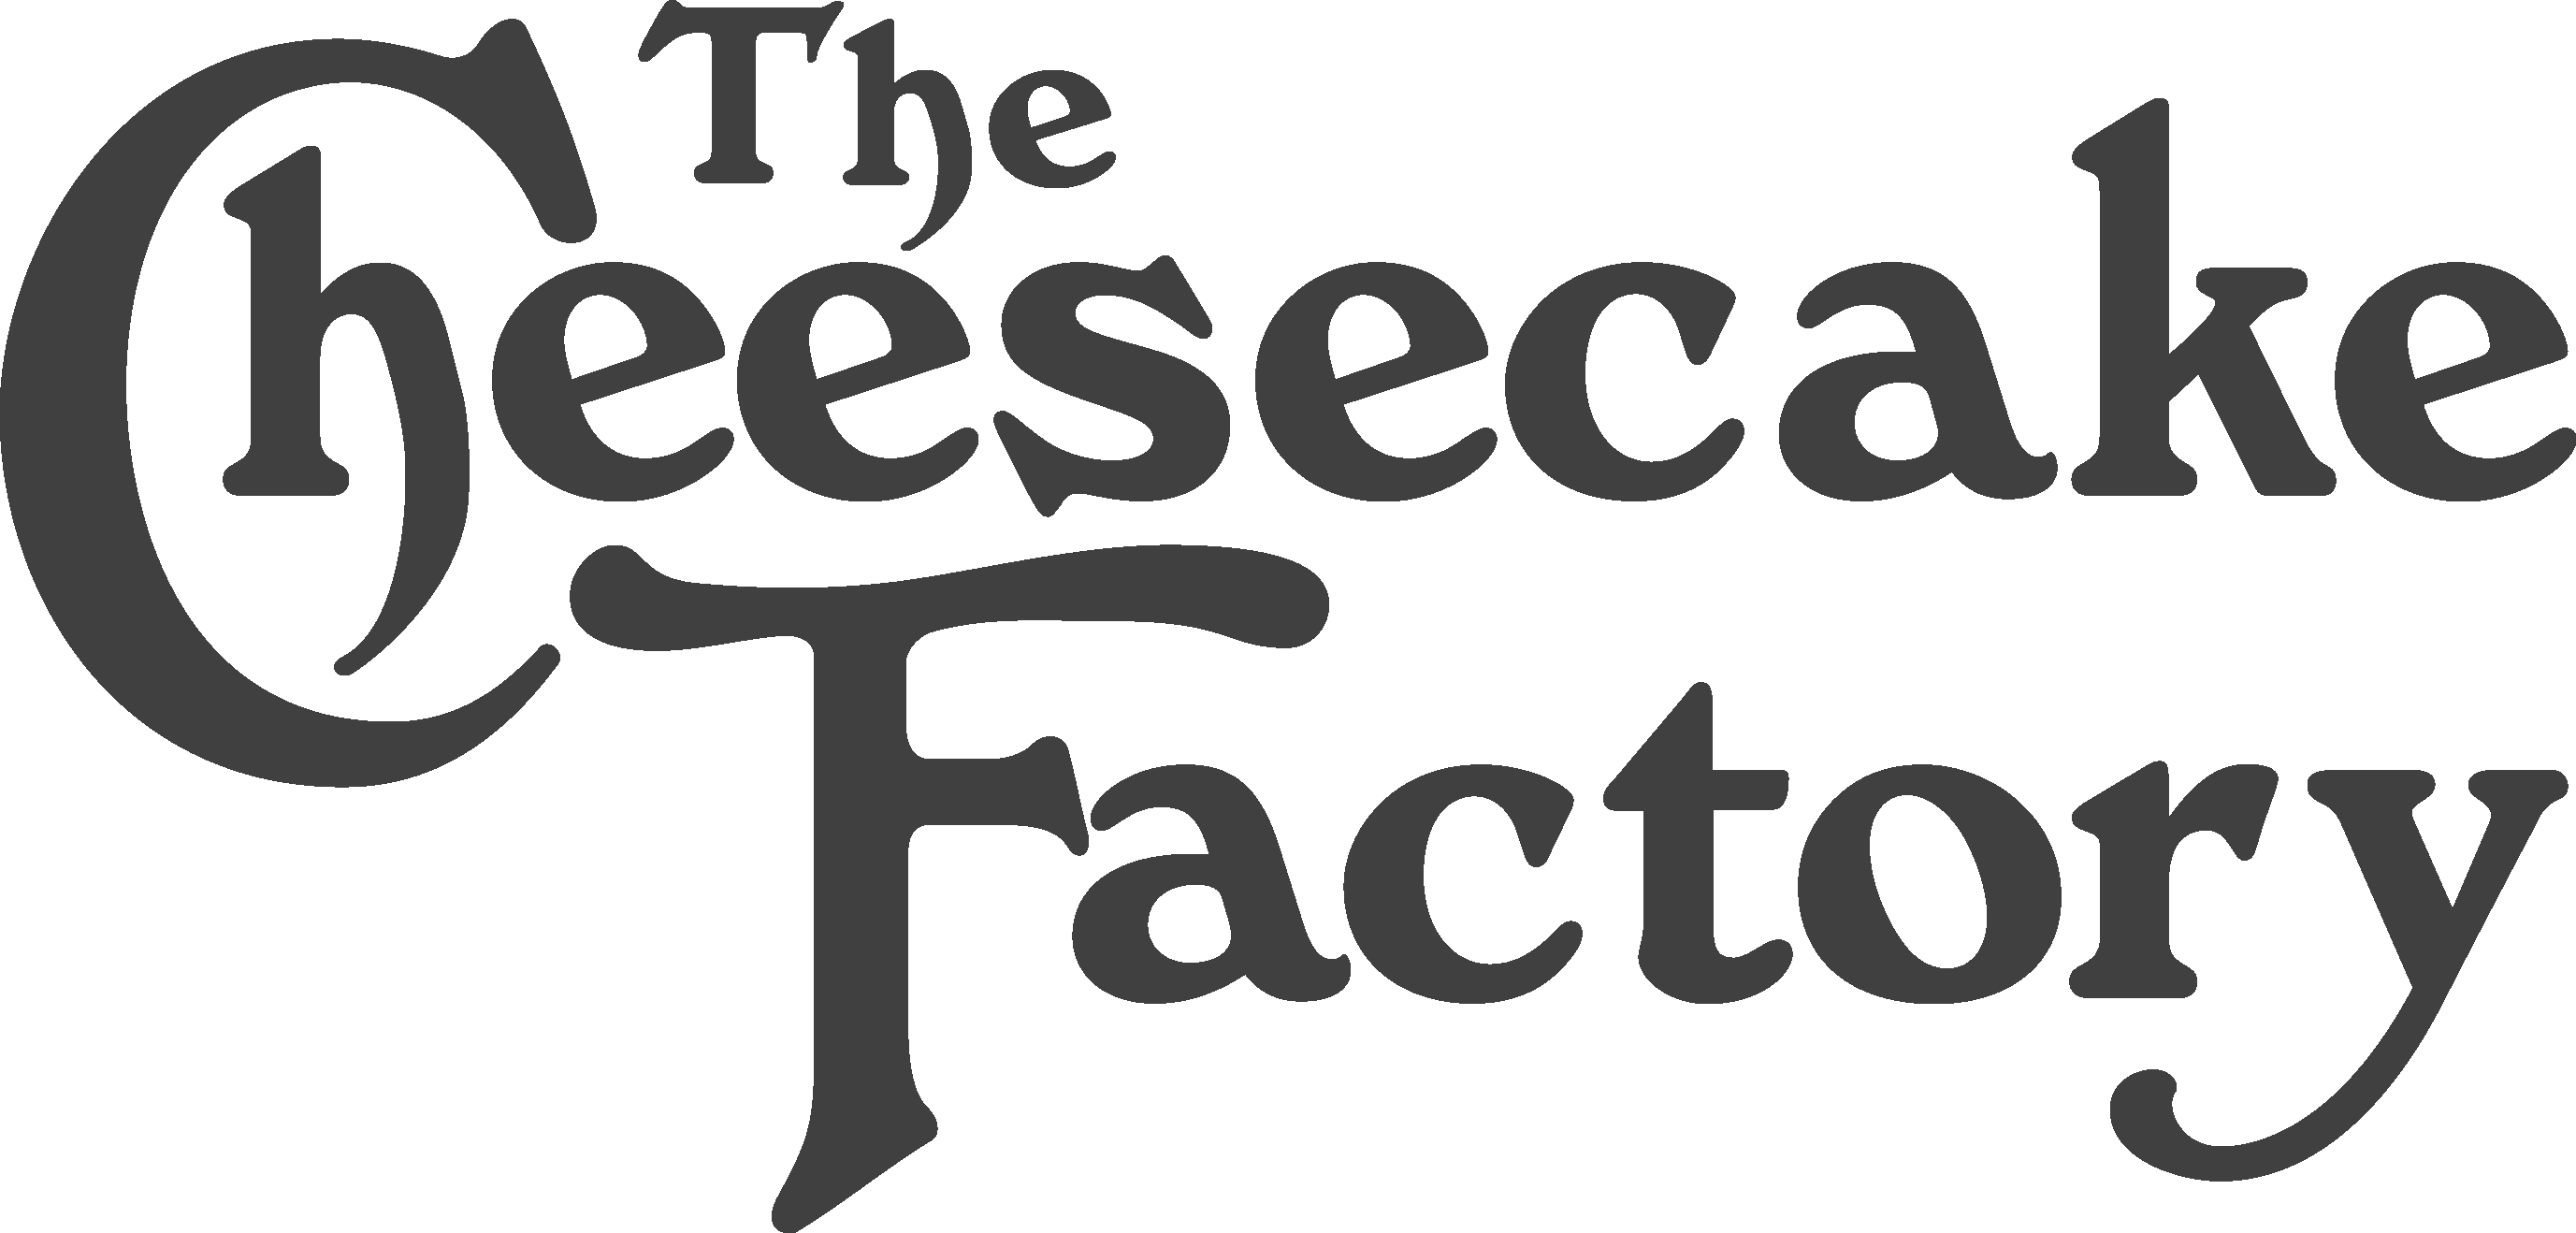 Cheesecake Factory Logo - The Cheesecake Factory Logo - Free Downloads Graphic Design Materials